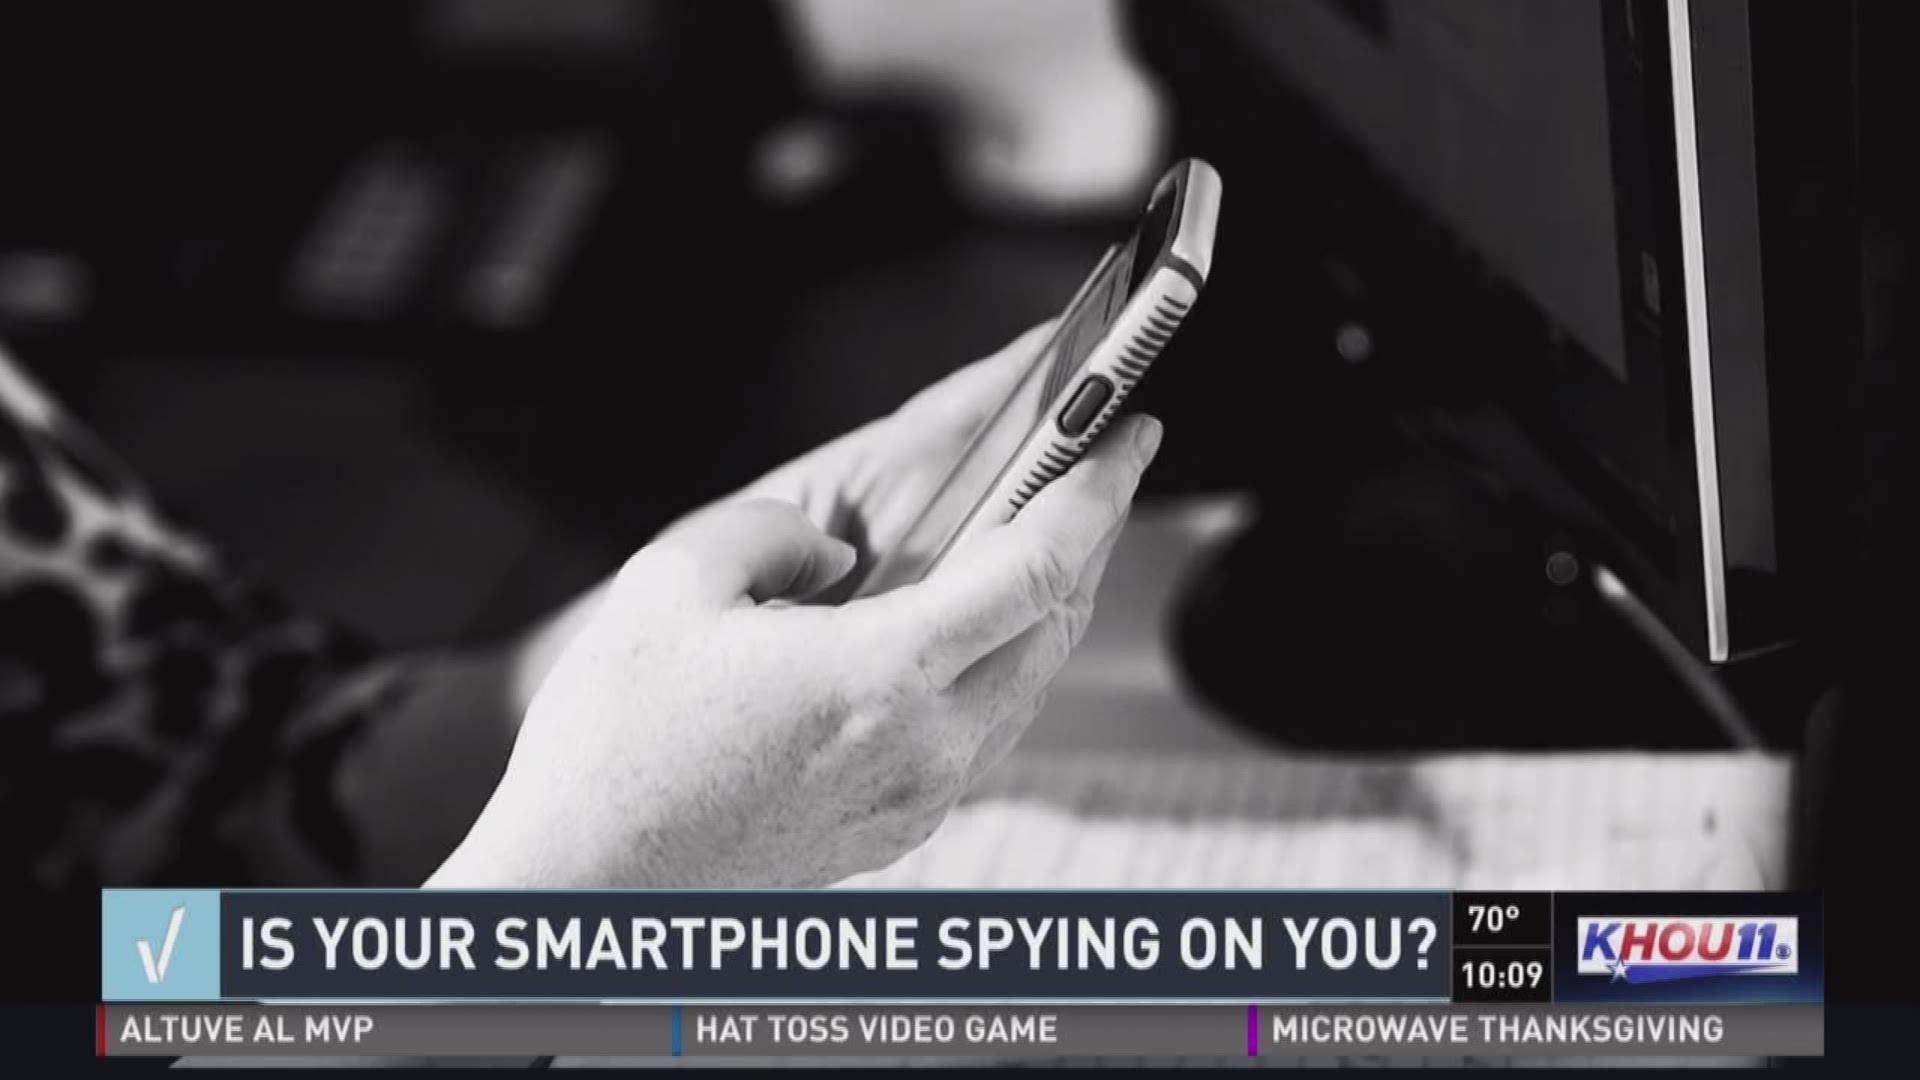 Your smart phone follows you wherever you go, tracks your movements and stores all kinds of personal data. But what about the idea of your phone eavesdropping on your conversations?